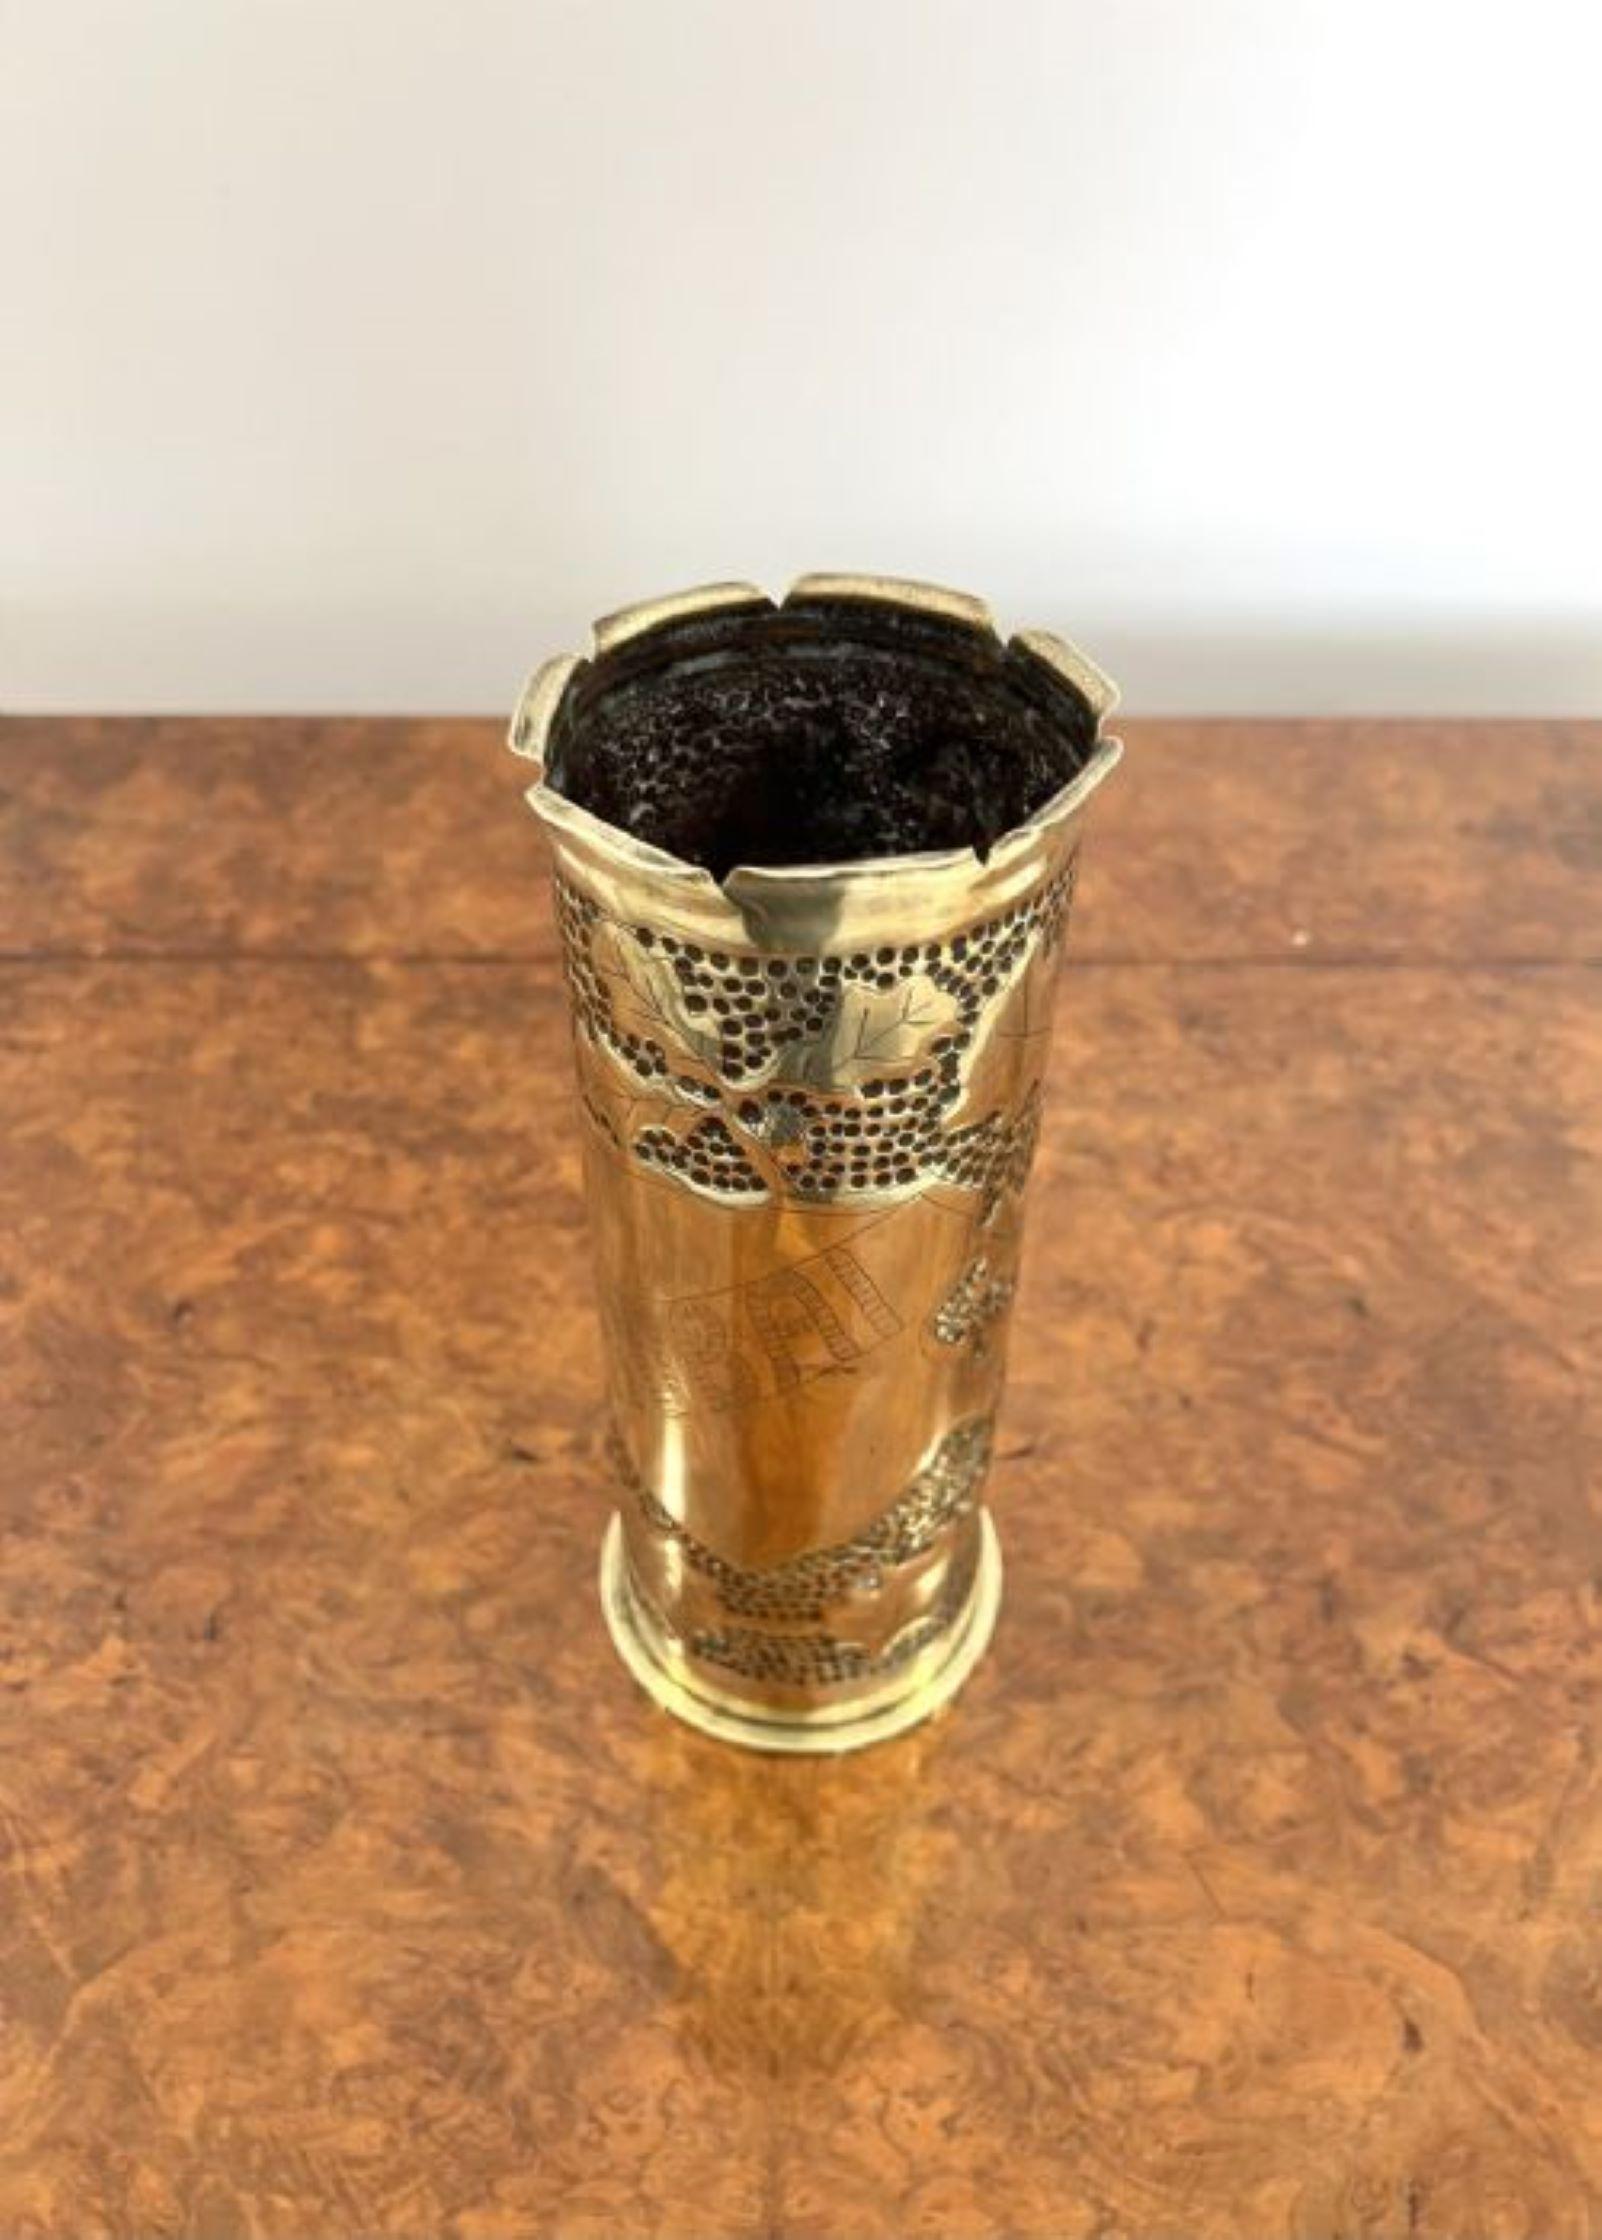 Quality antique WW1 trench art brass empty shell case having a quality WW1 trench art empty shell case with beautiful decoration with leaves and a crest with 'ROBAI' engraved to the centre. 

D. 1915